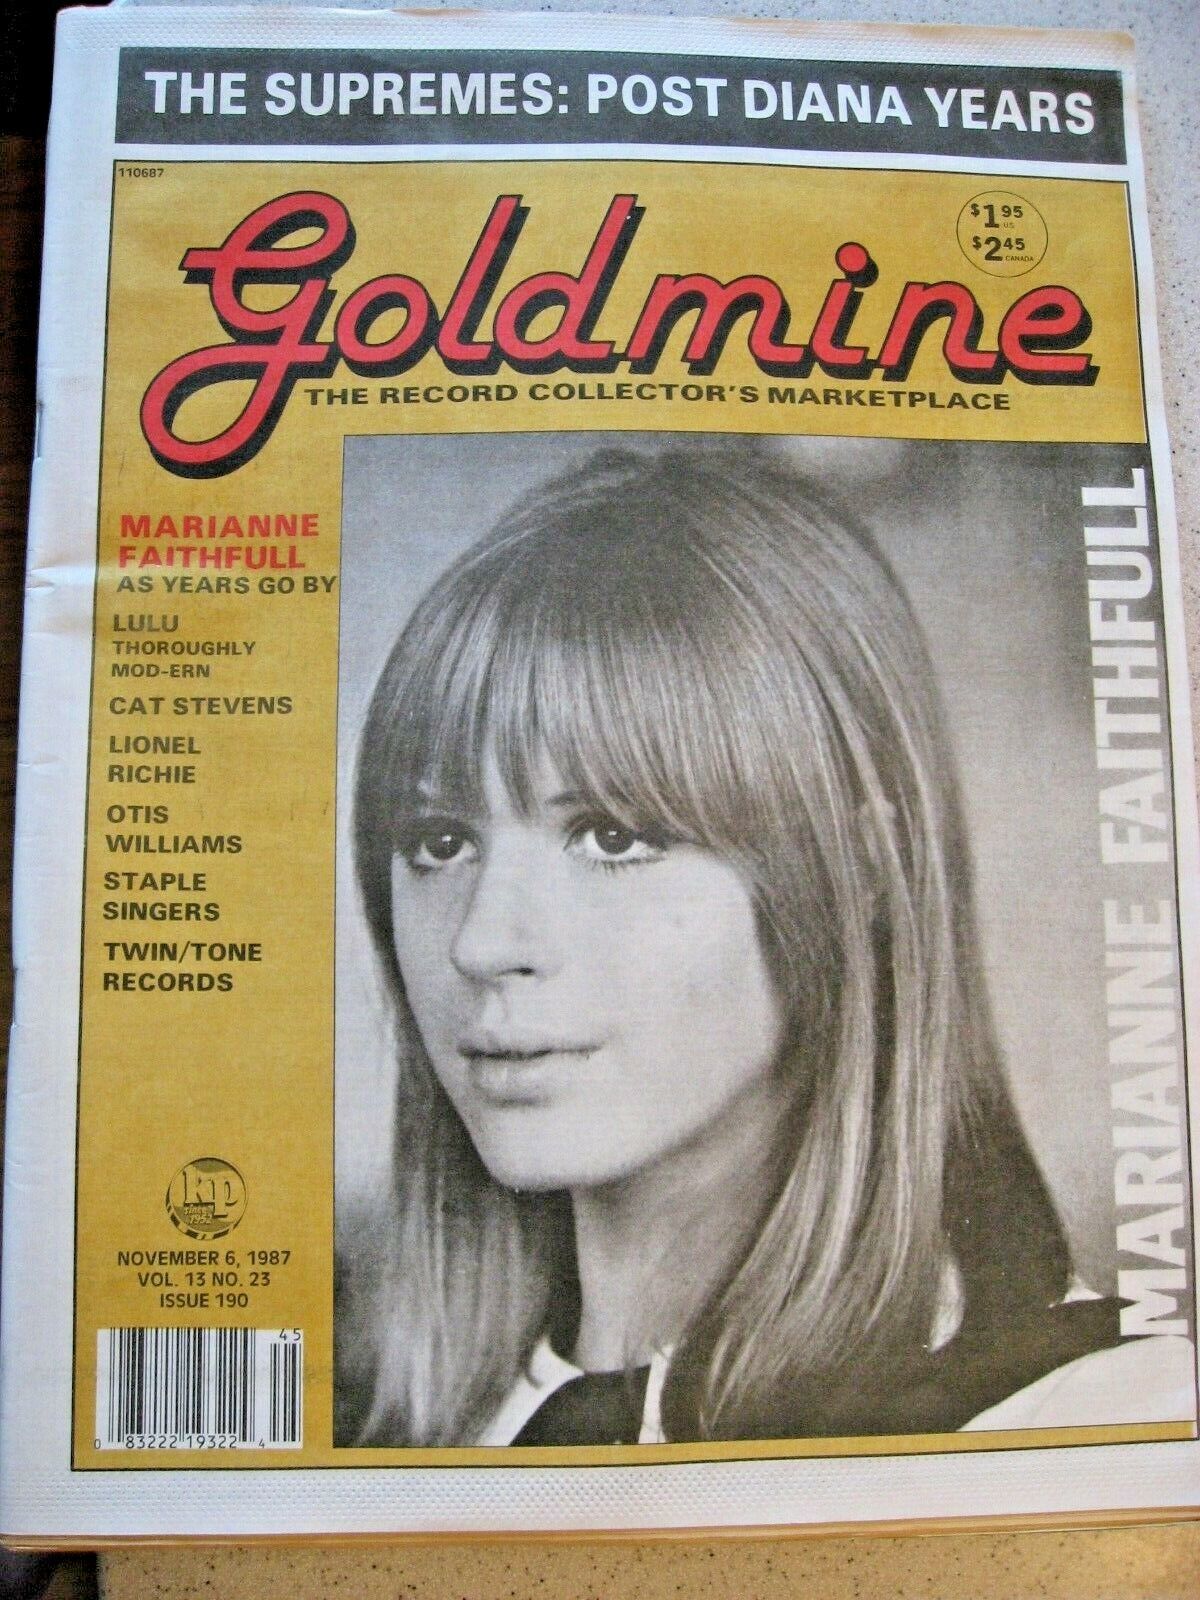 Goldmine The Collector\'s Market Place Paper 1987 Vol 13 No 23 Marianne Faithfull